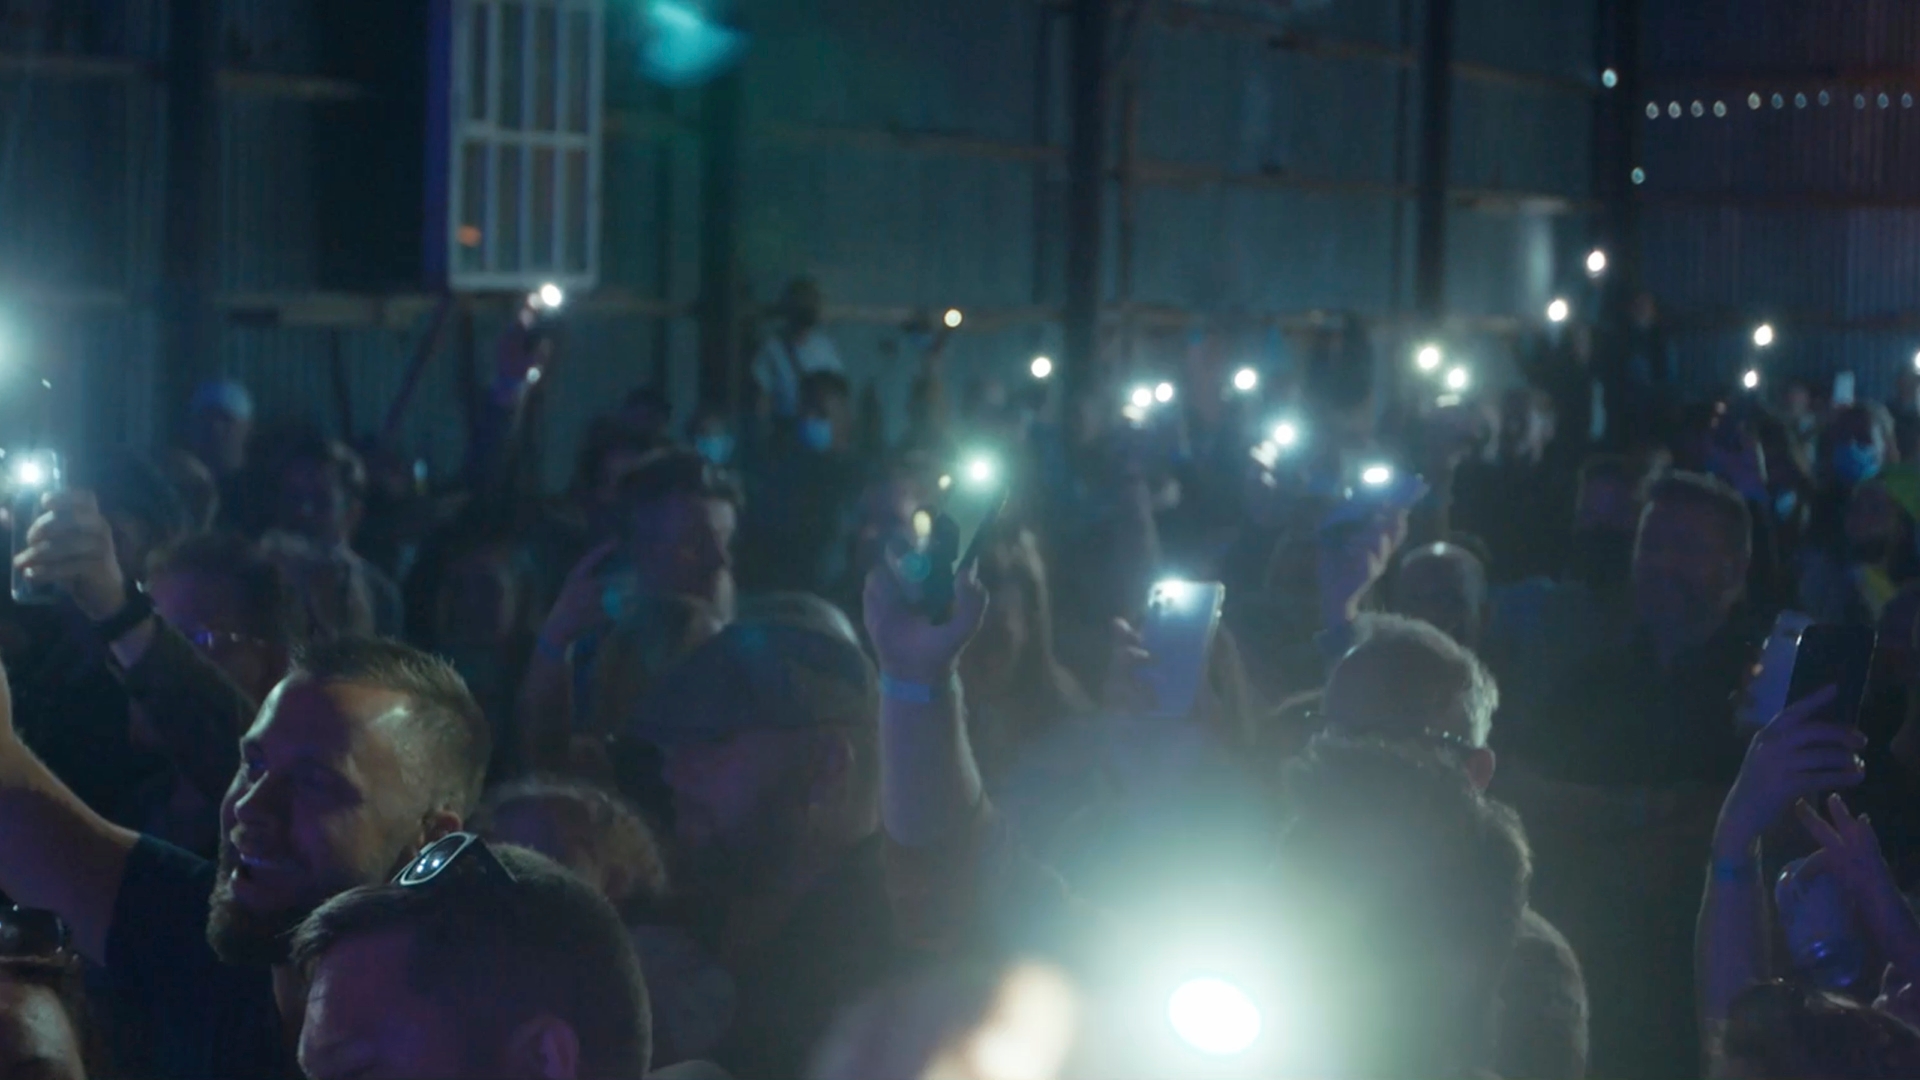 Inside the factory, a large crowd stands in a darkened room with their lit up phones held overhead, enjoying Braedlan music festival